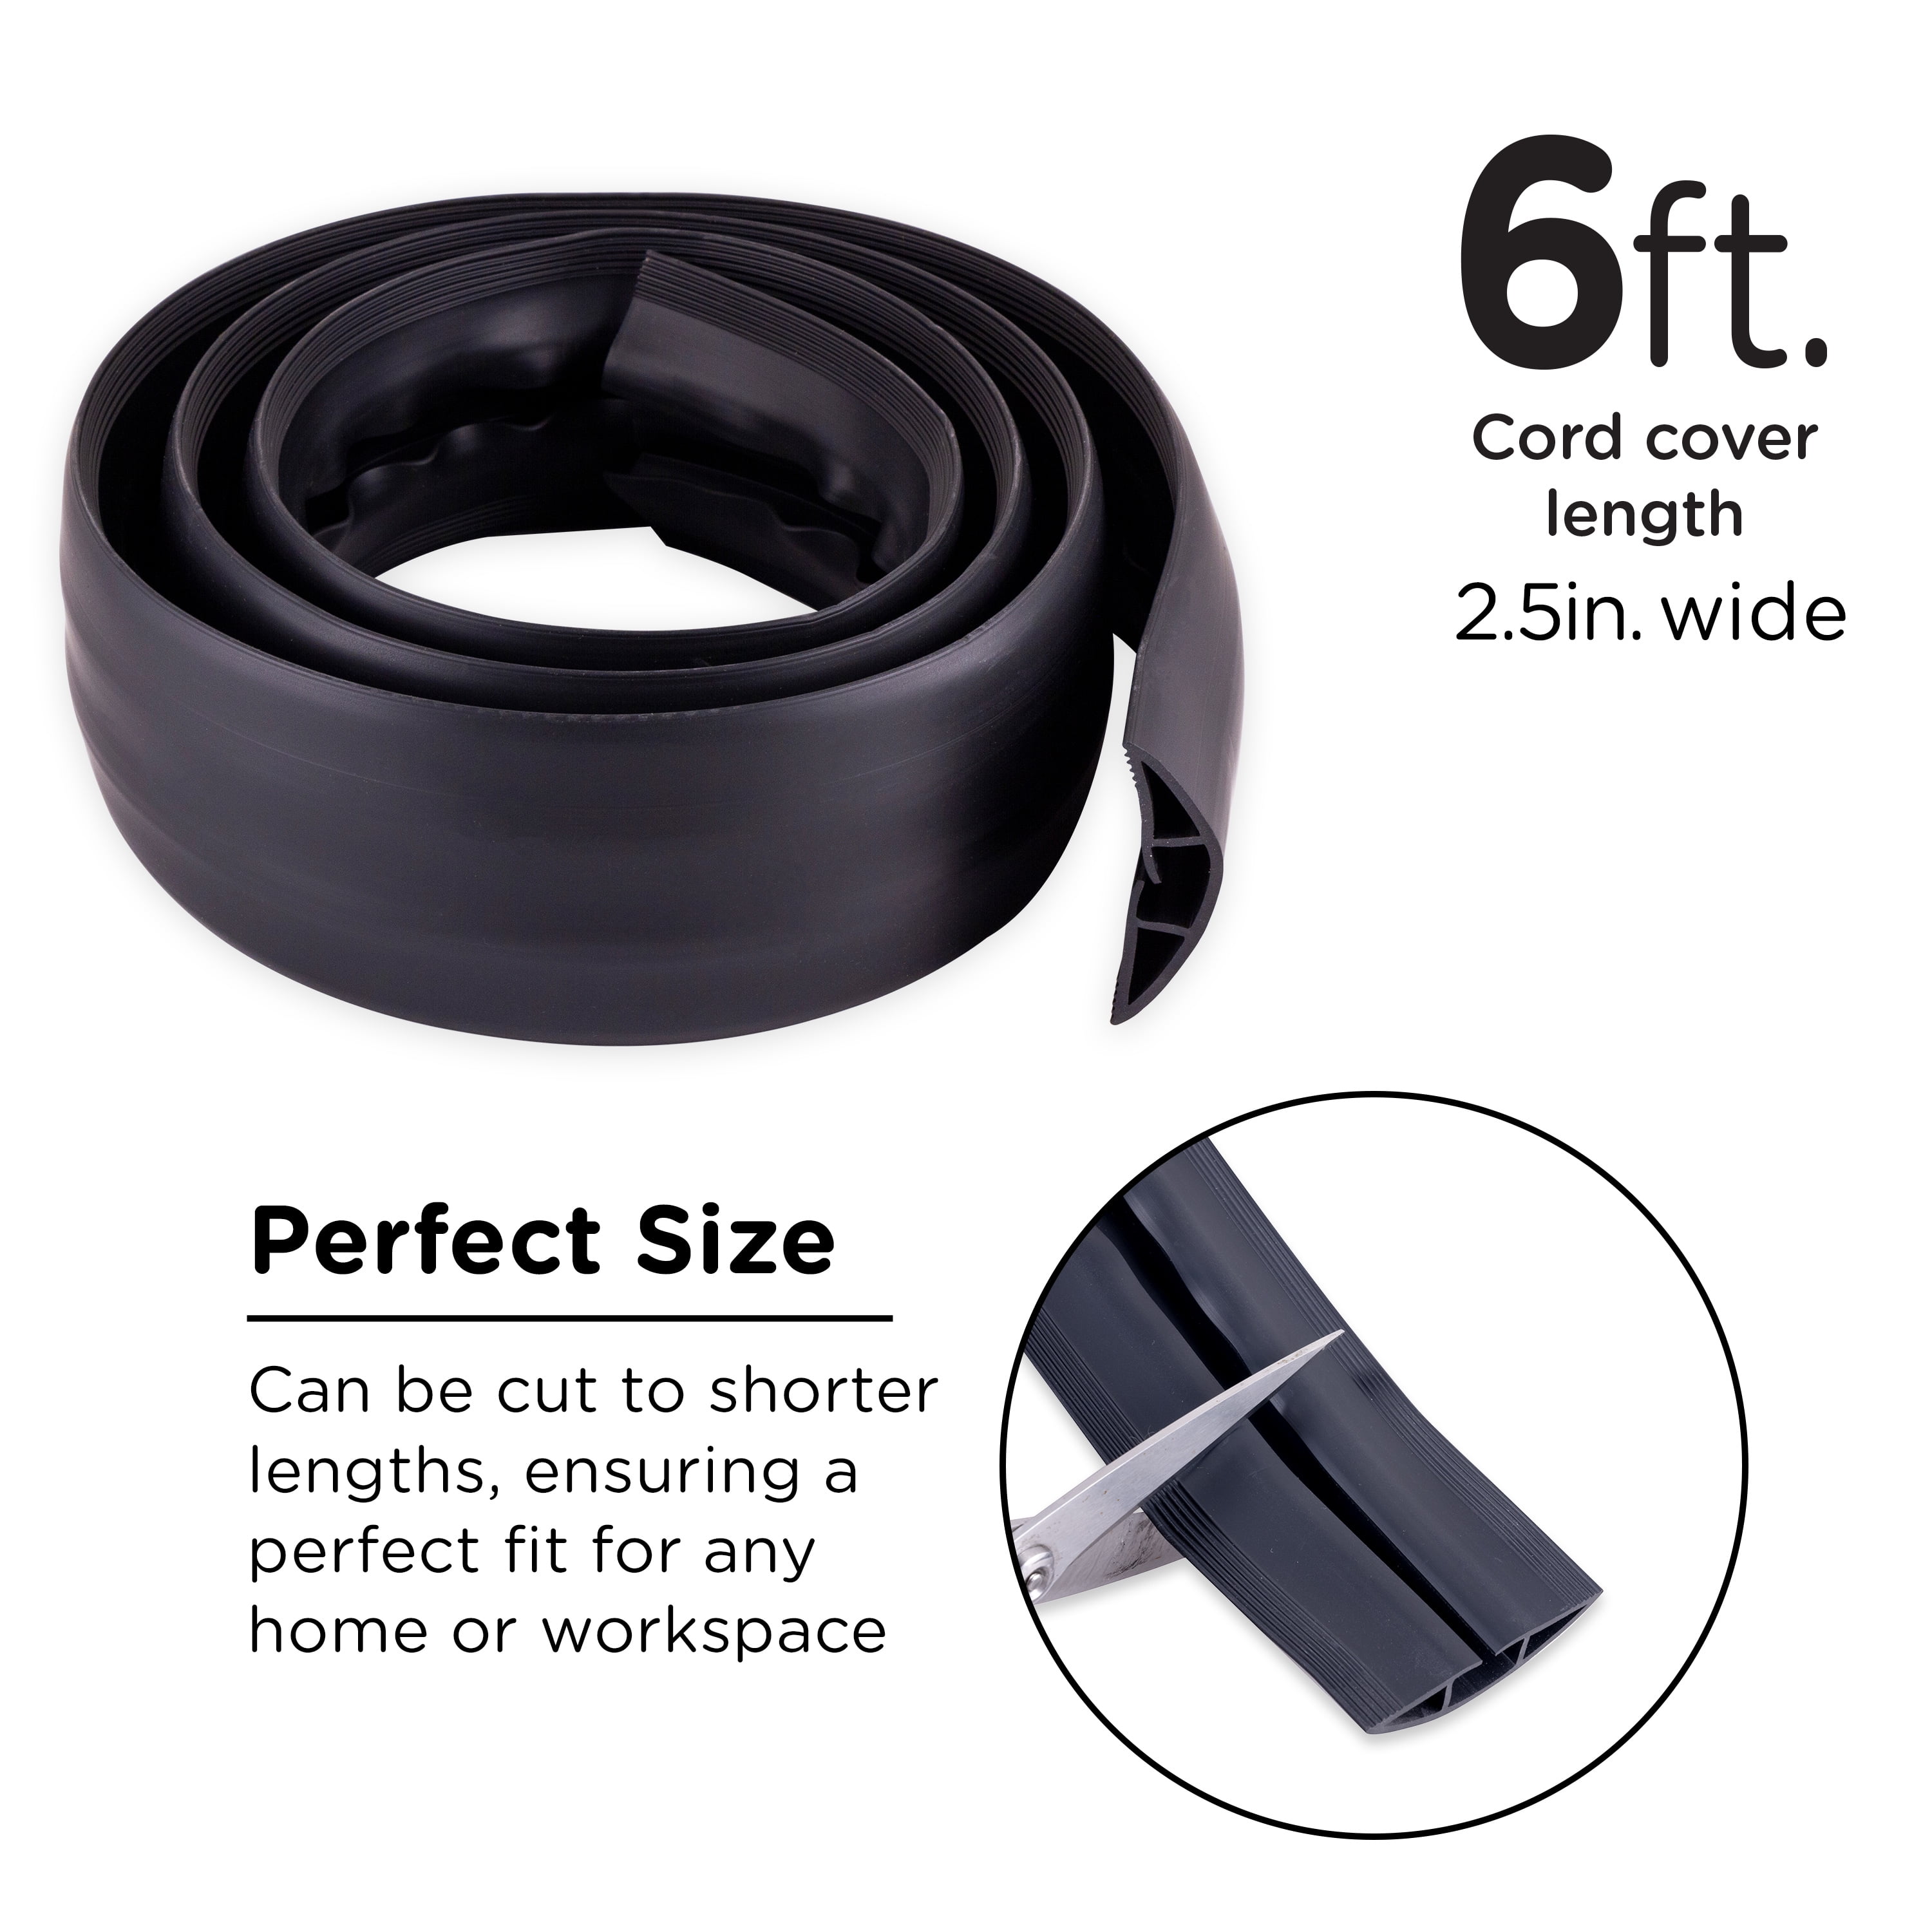 Cordinate 6 ft Cord Cover Floor, Cord Protector and Management, Cord  Concealer, Cable Hider and Cable Raceway, Extension Cord Cover, Black, 43003